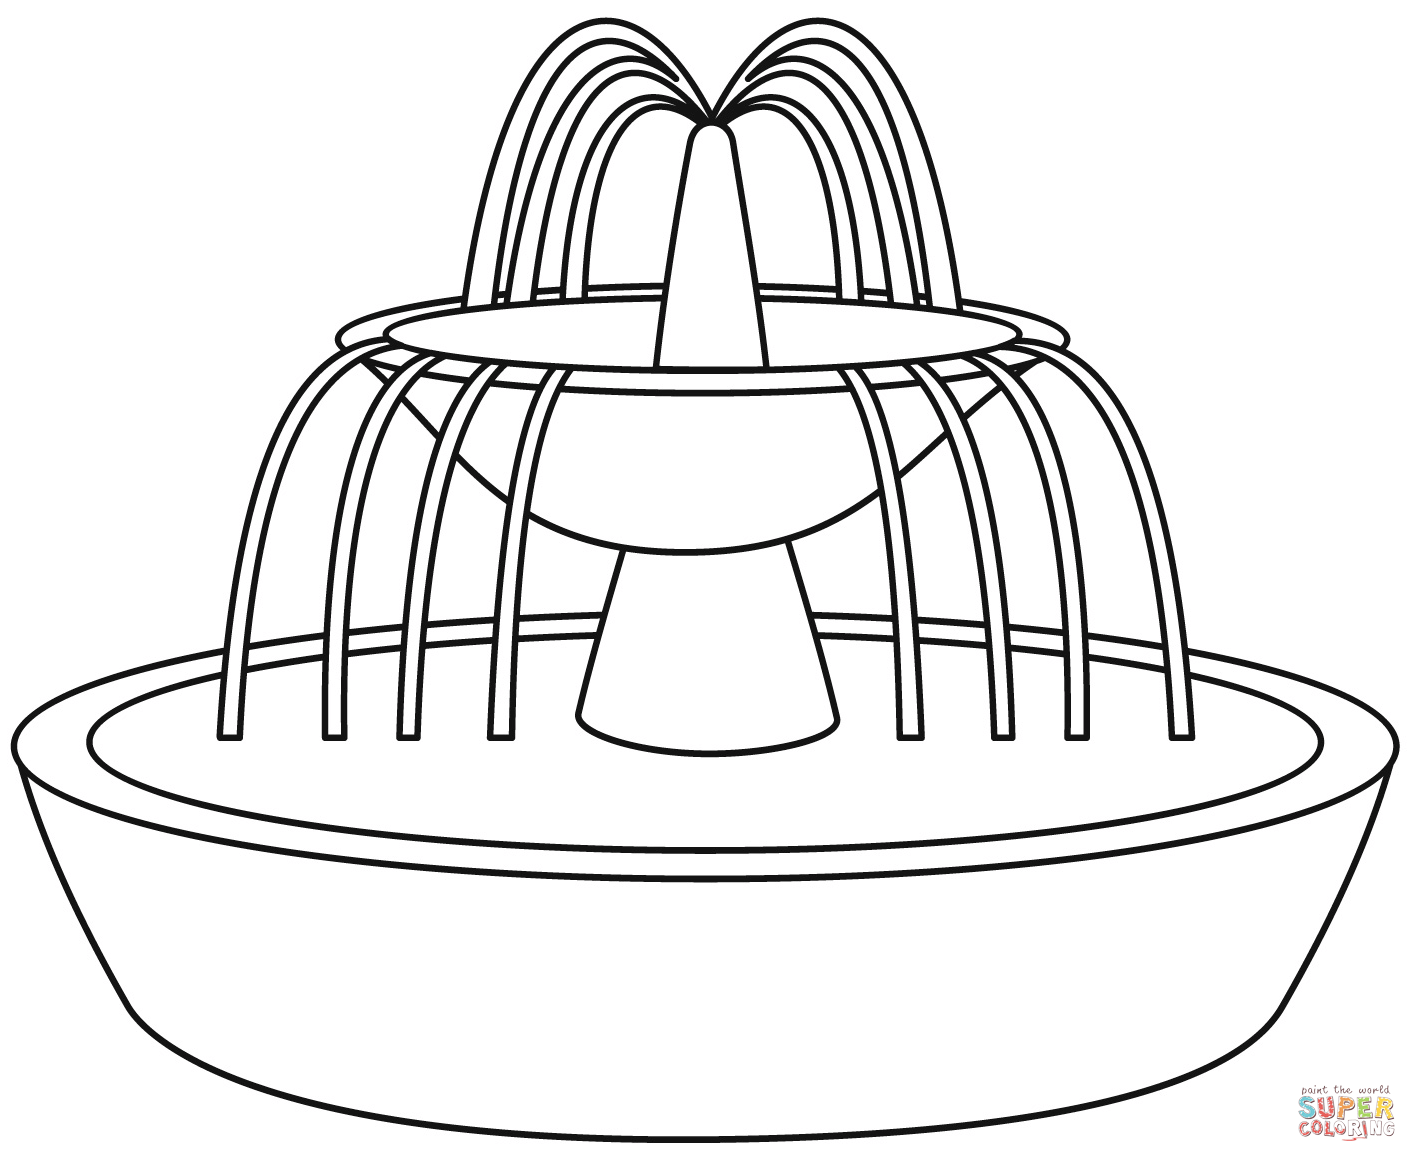 Fountain coloring page free printable coloring pages